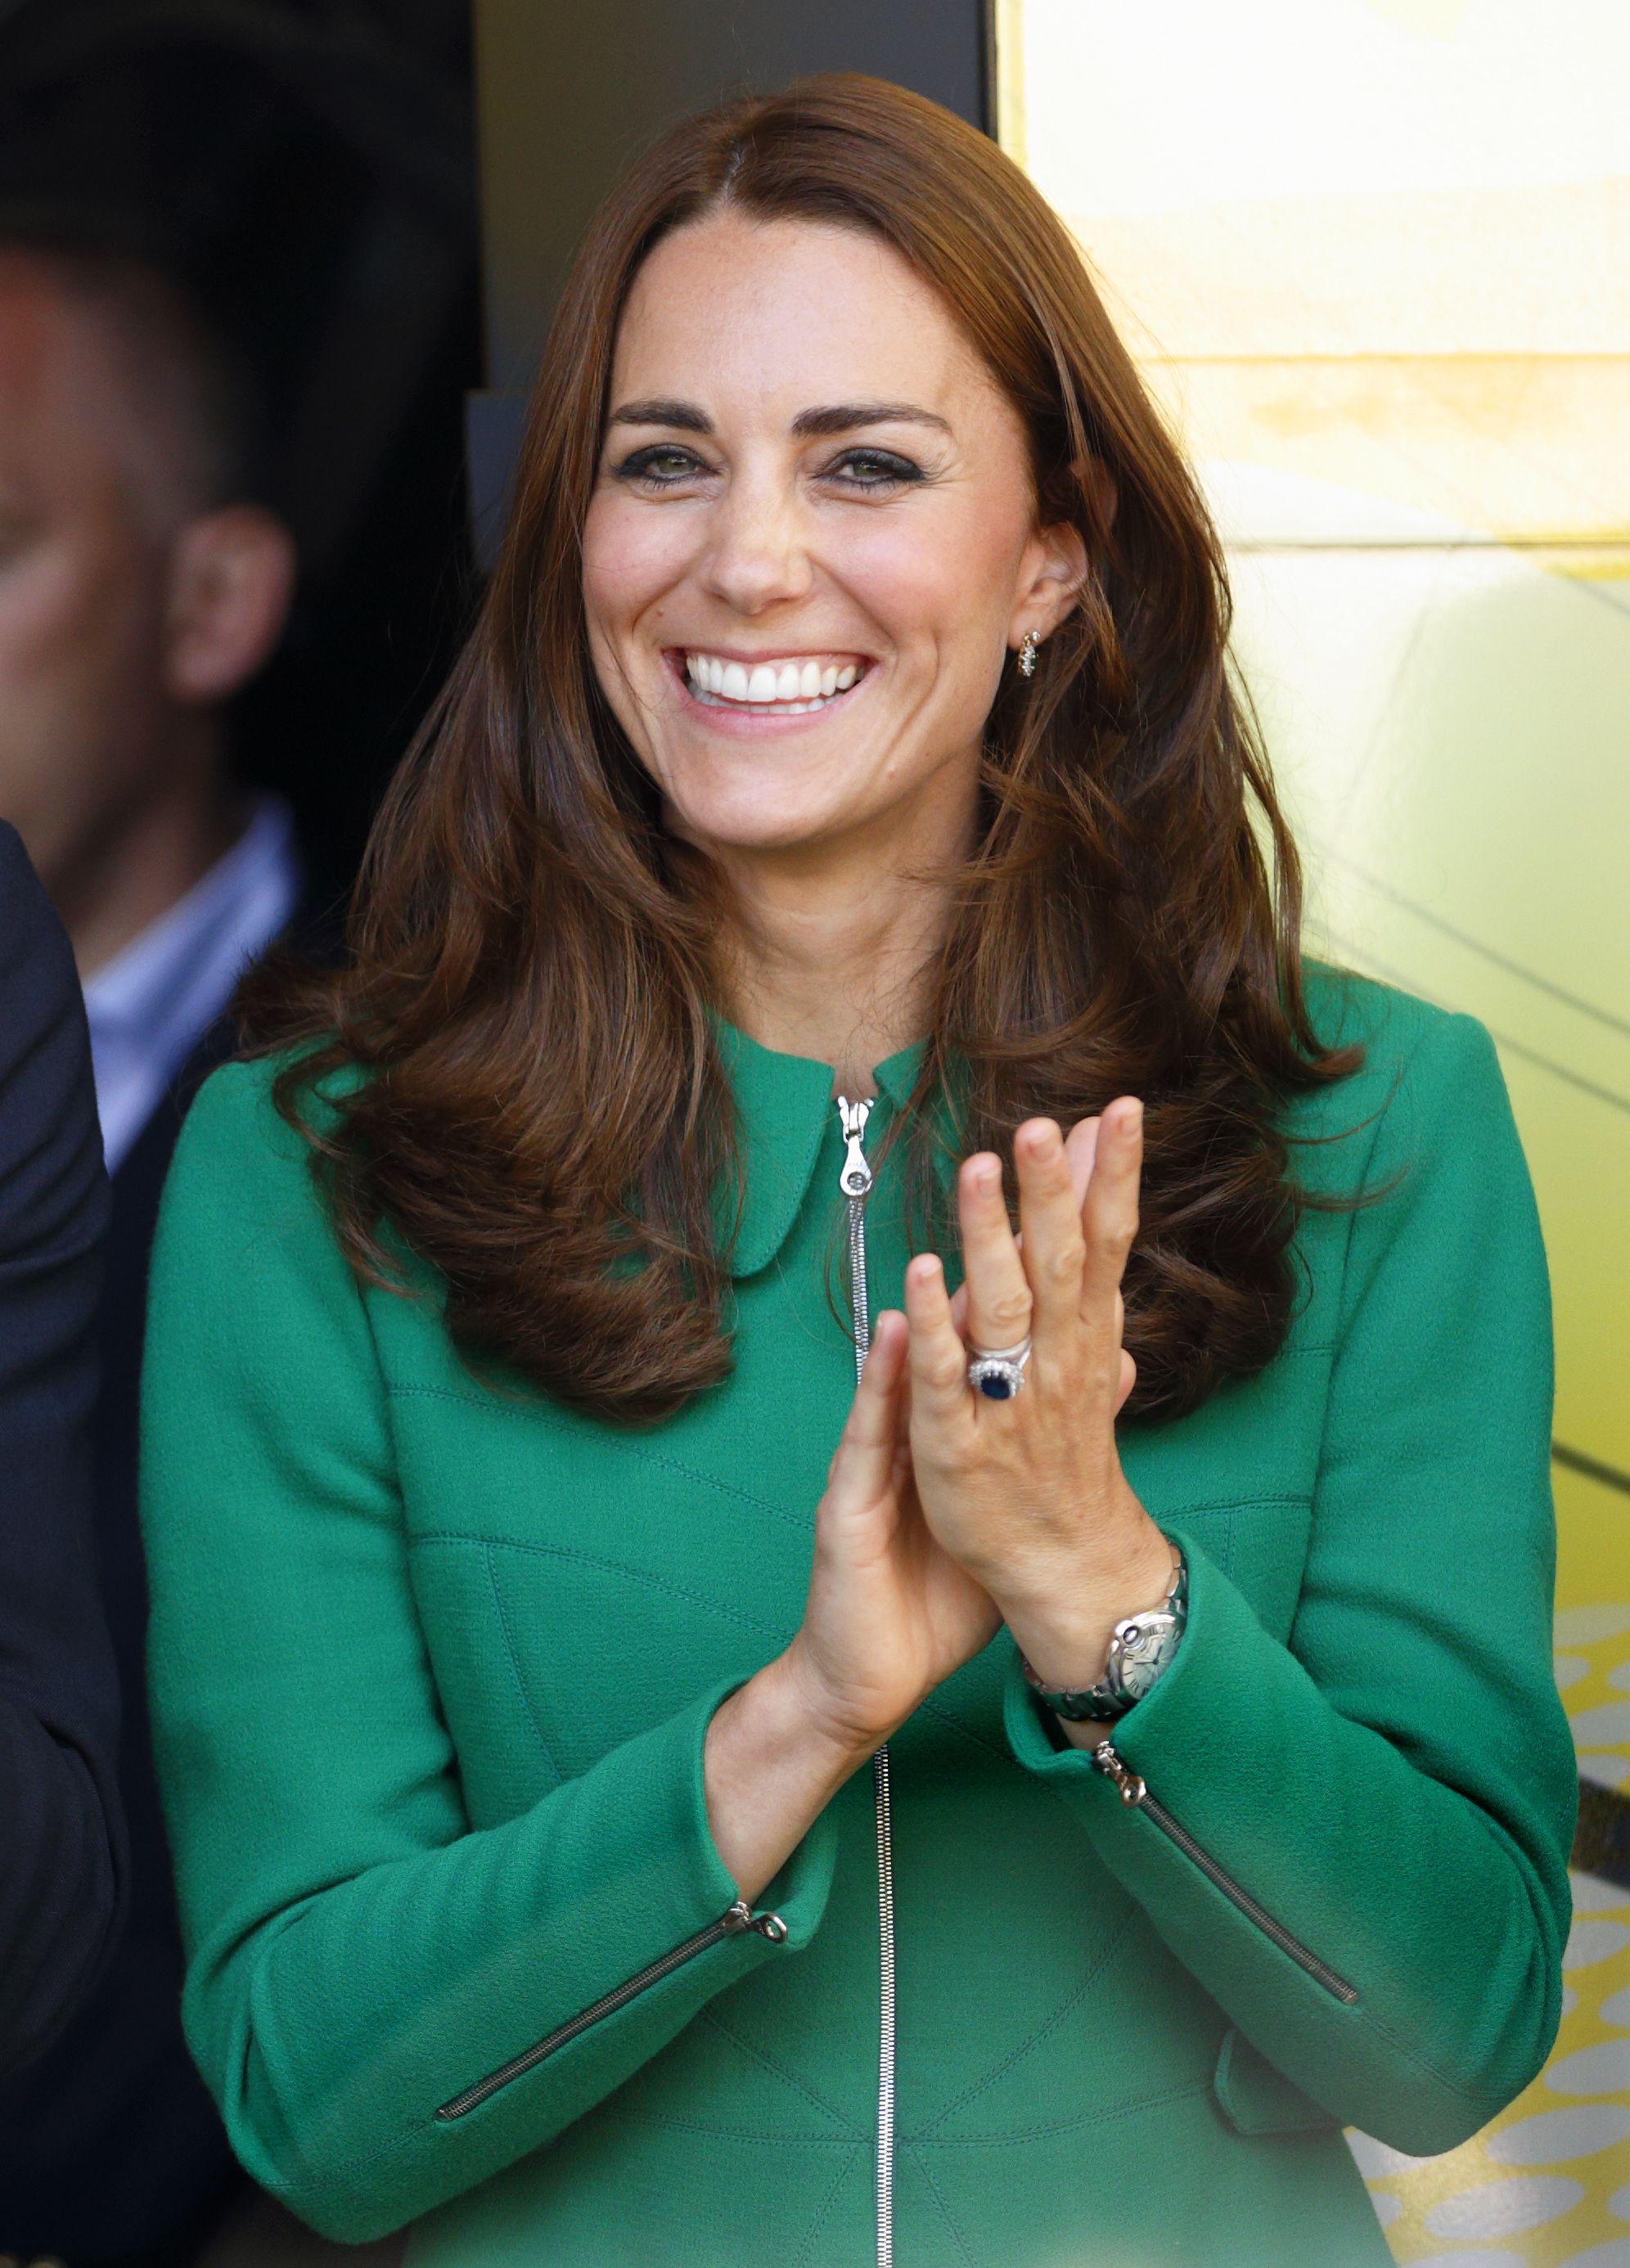 The Duke and Duchess of Cambridge and Prince Harry attend the big departure of the Tour de France